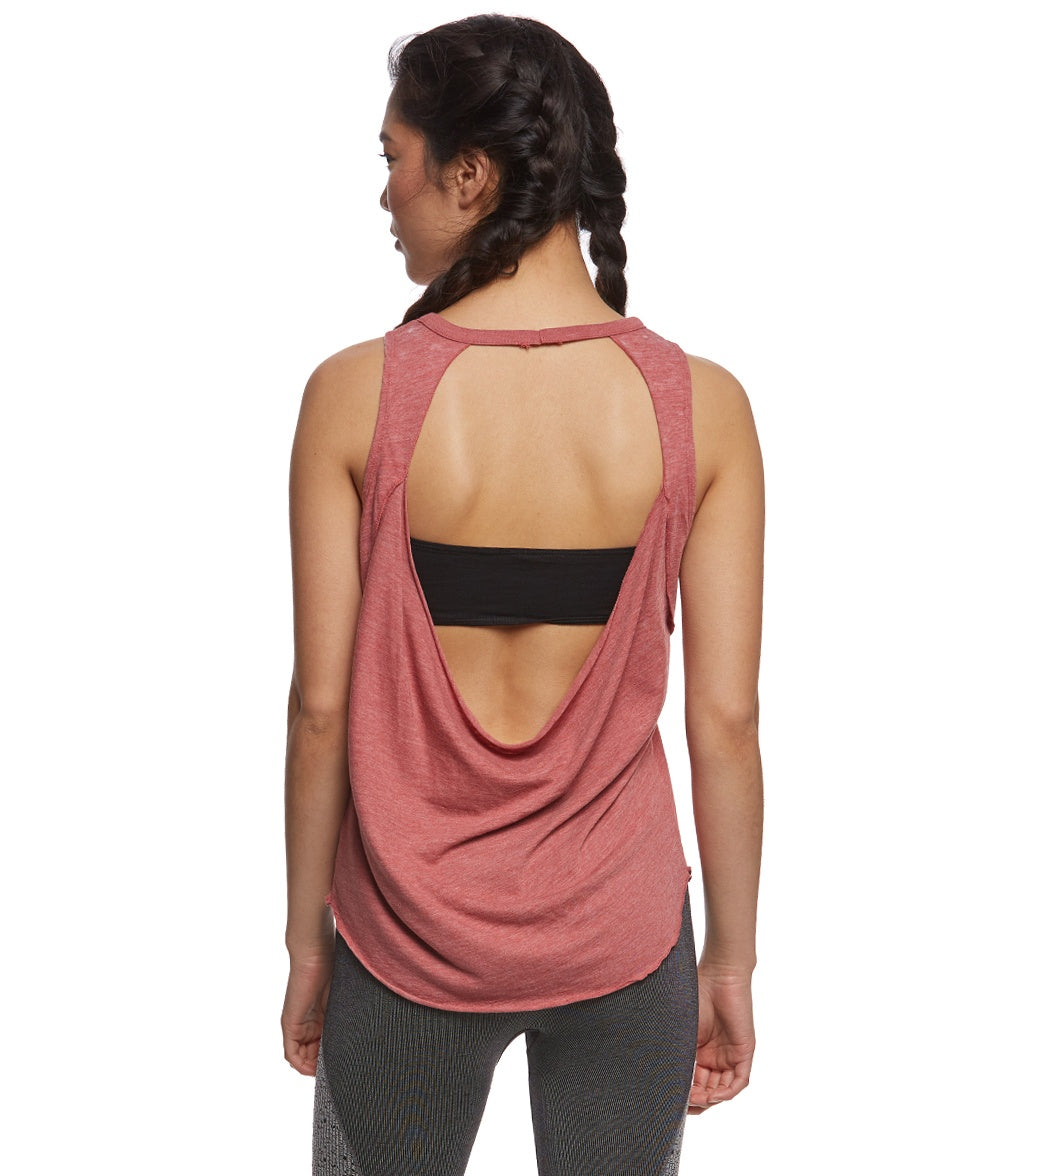 Everyday Yoga Girl's Wholesome Tribe Sports Bra at YogaOutlet.com –